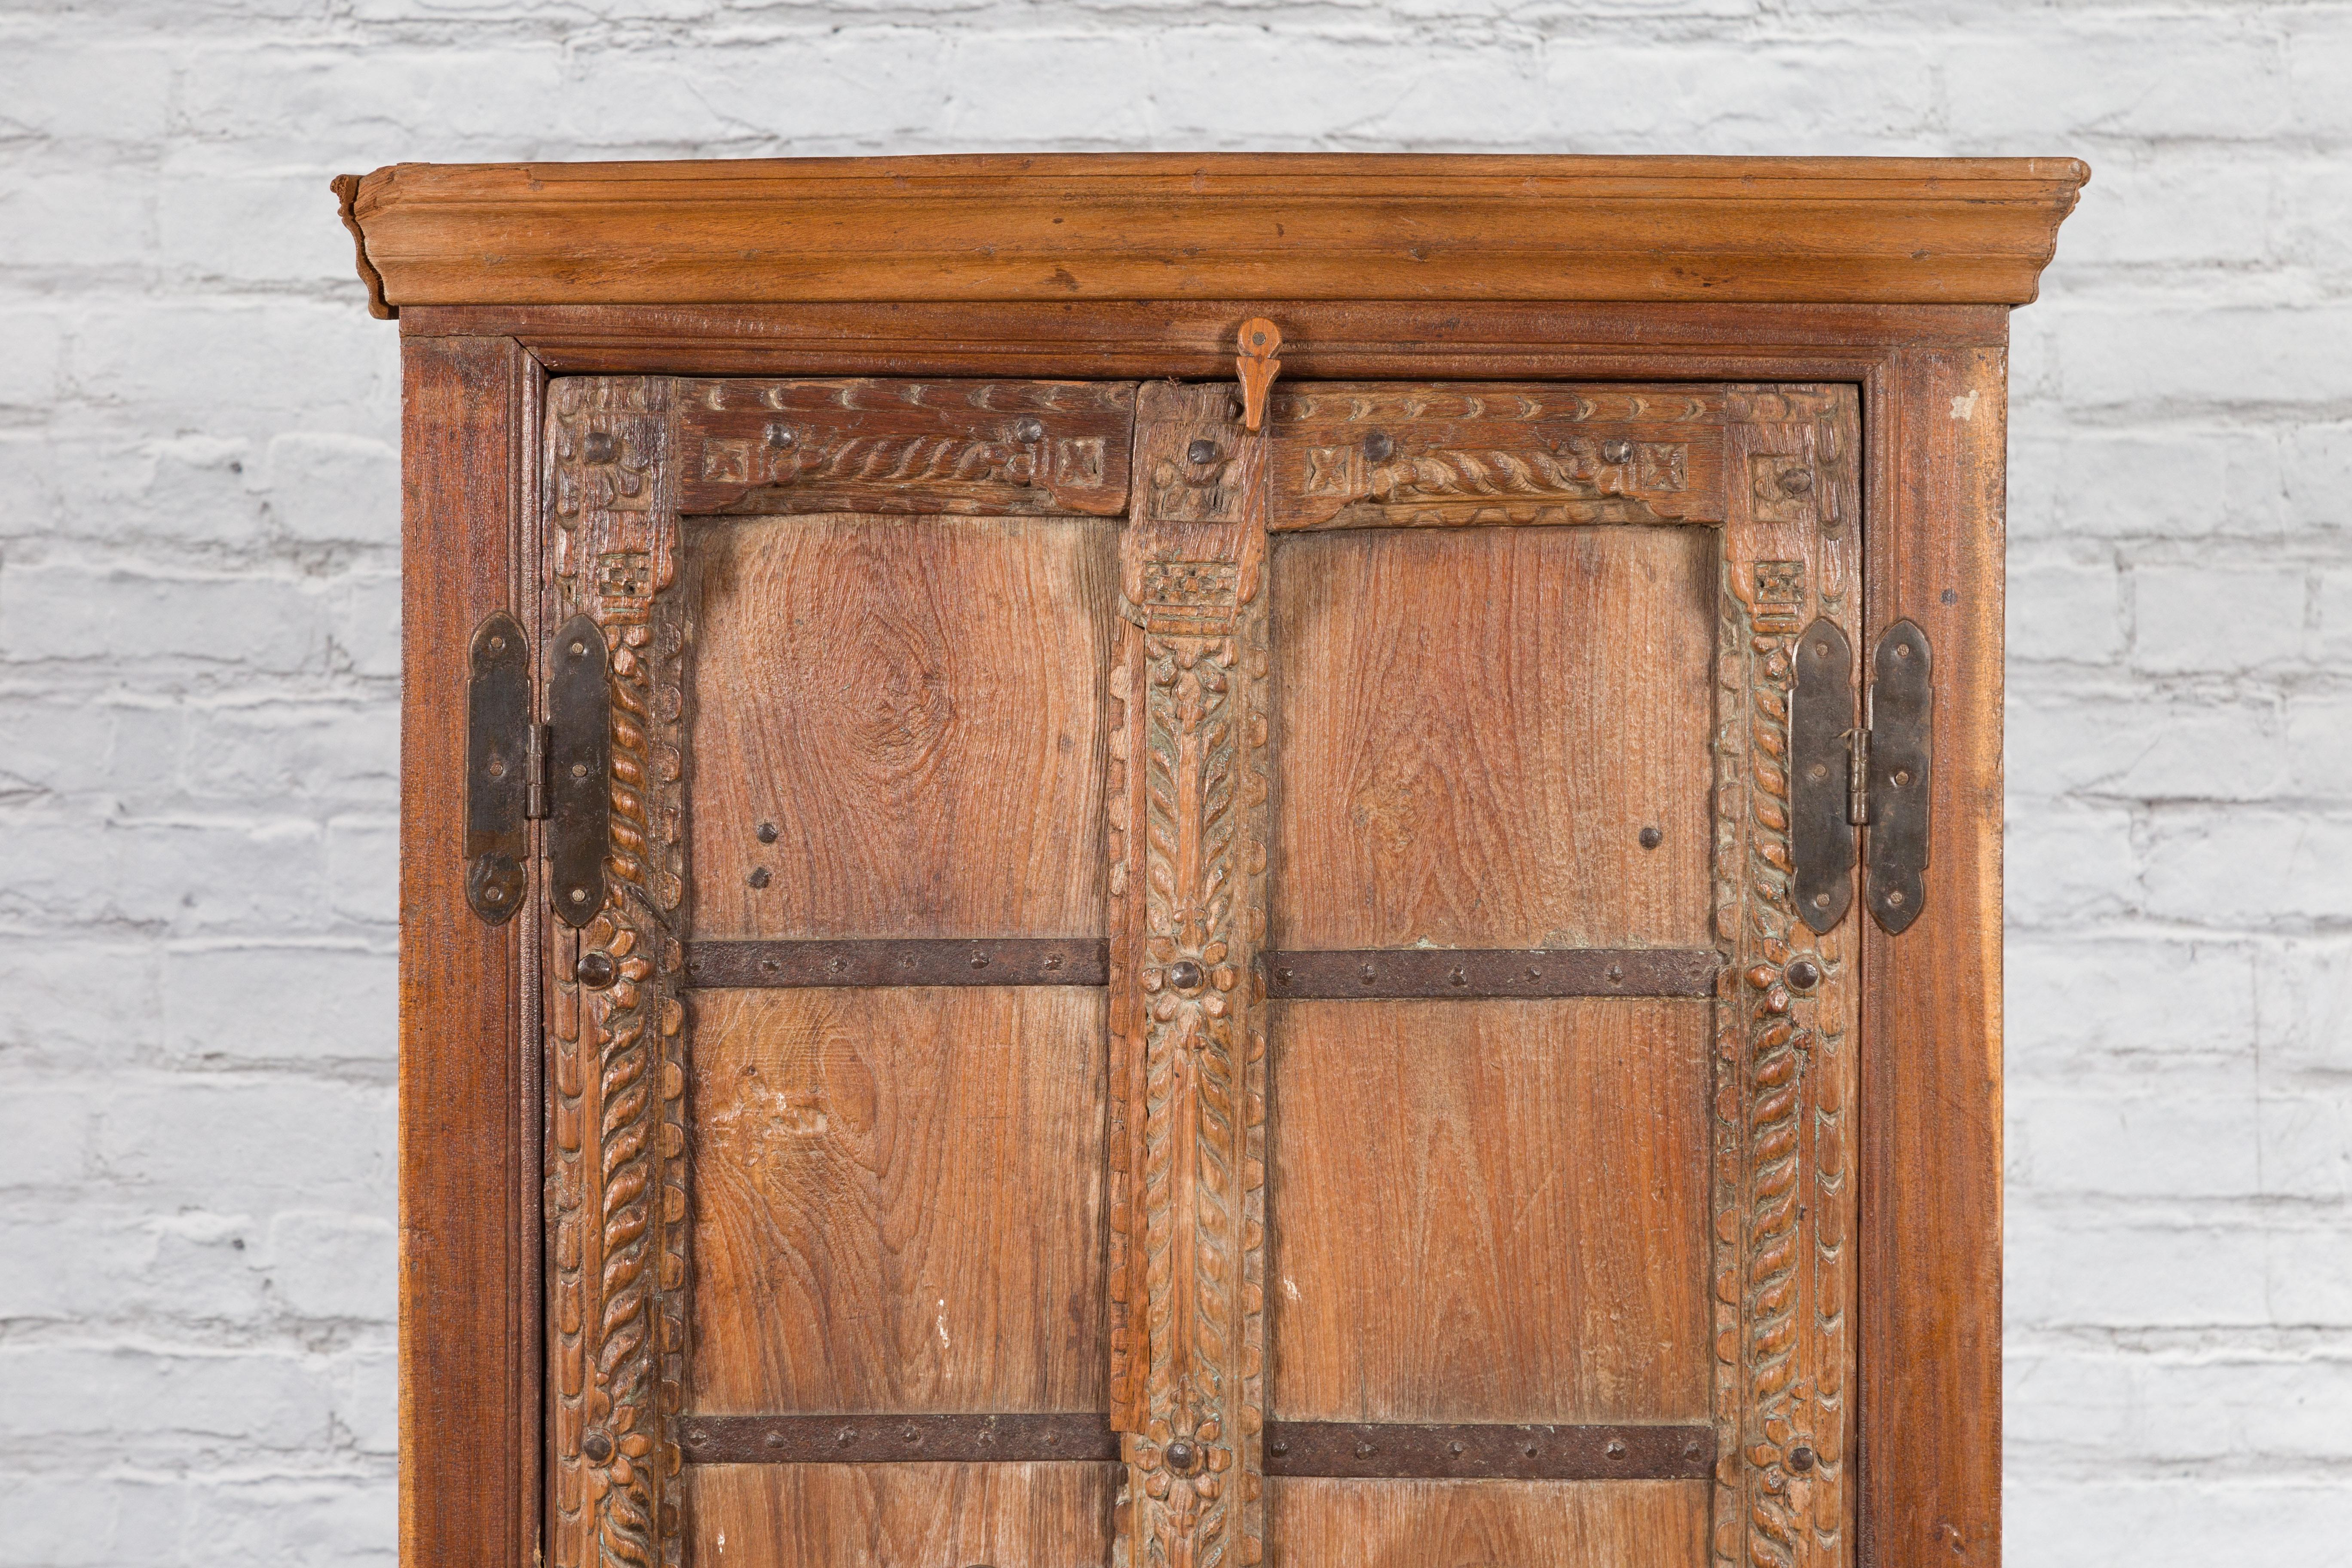 Antique 19th Century Indian Armoire with Metal Braces and Hand-Carved Décor 2